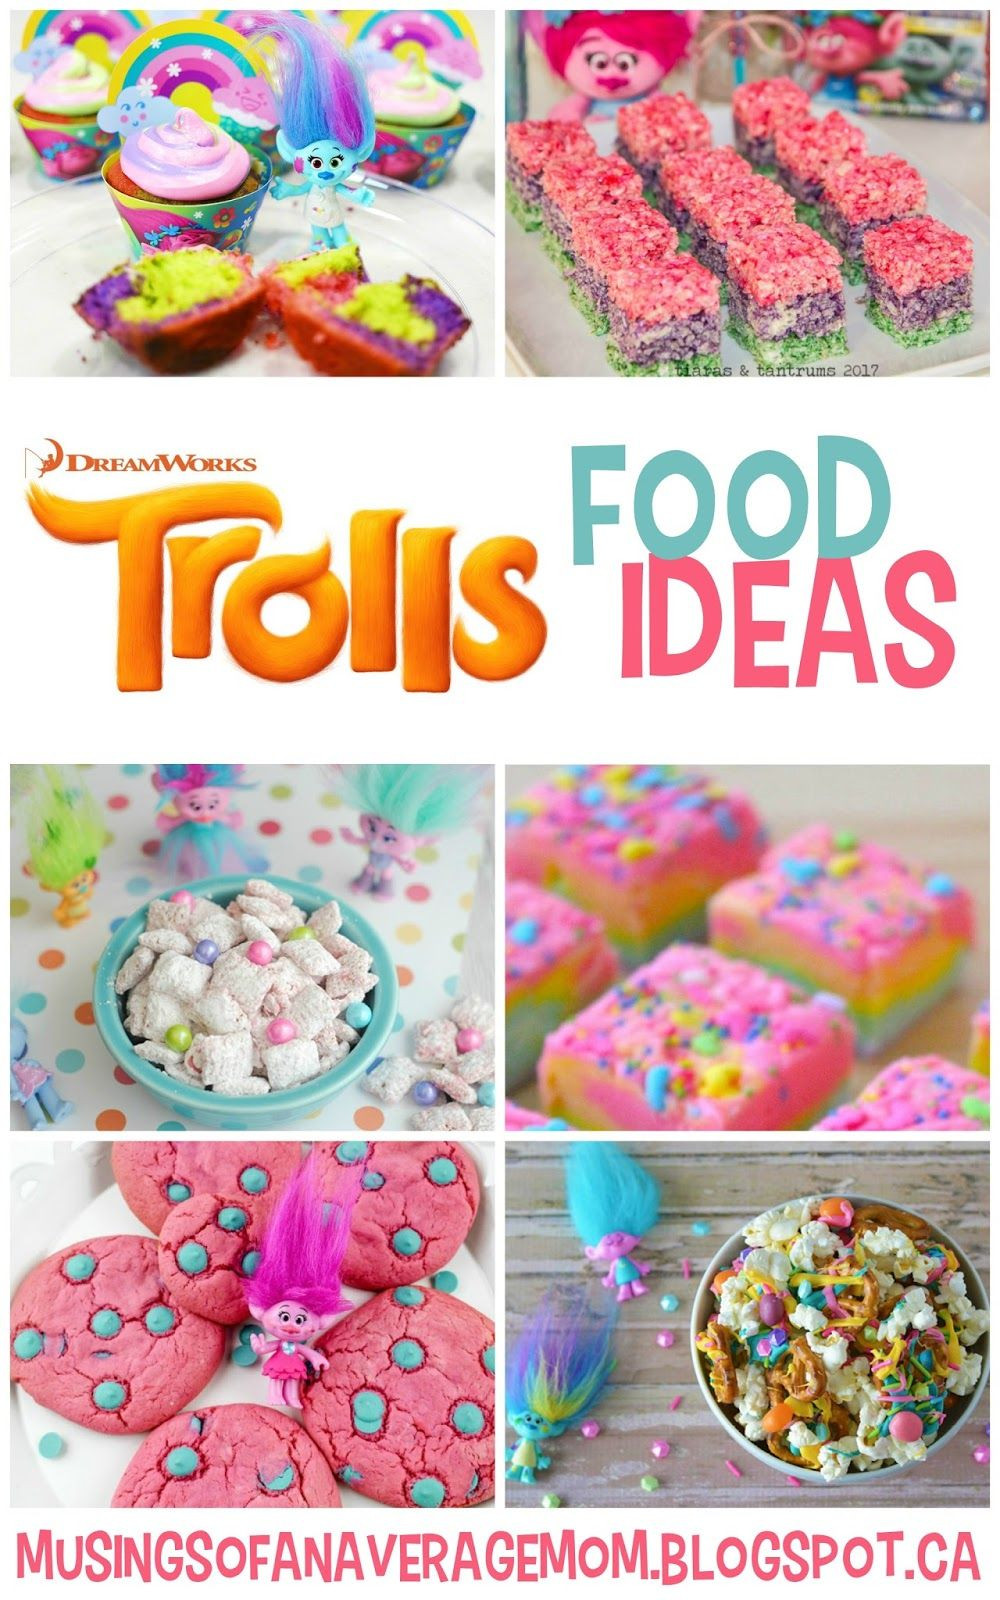 Fun Troll Movie Party Food Ideas
 Everything You Need for a Trolls Party